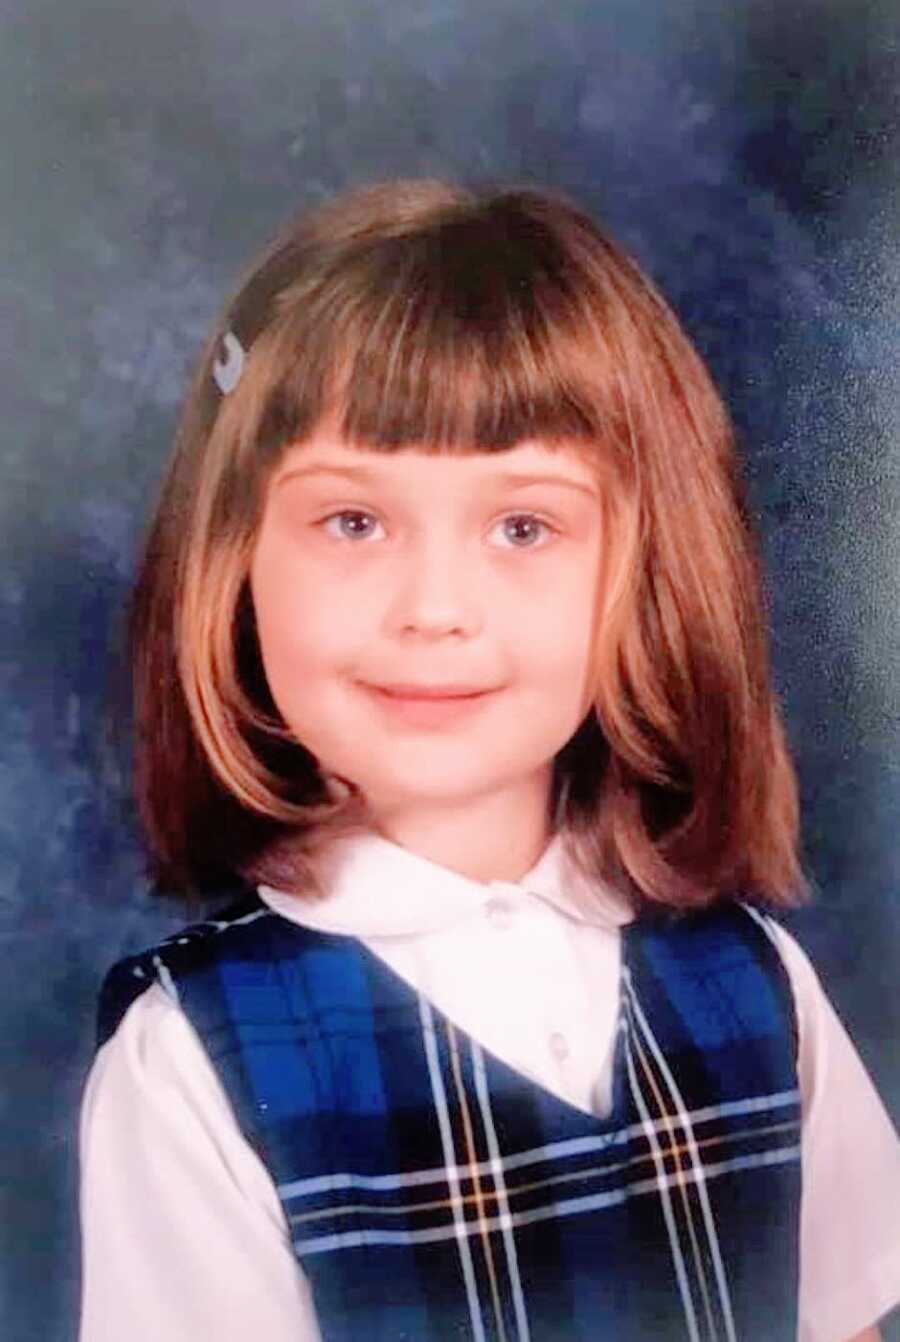 Little girl who with straight across bangs smiles in a school uniform for her school yearbook photo